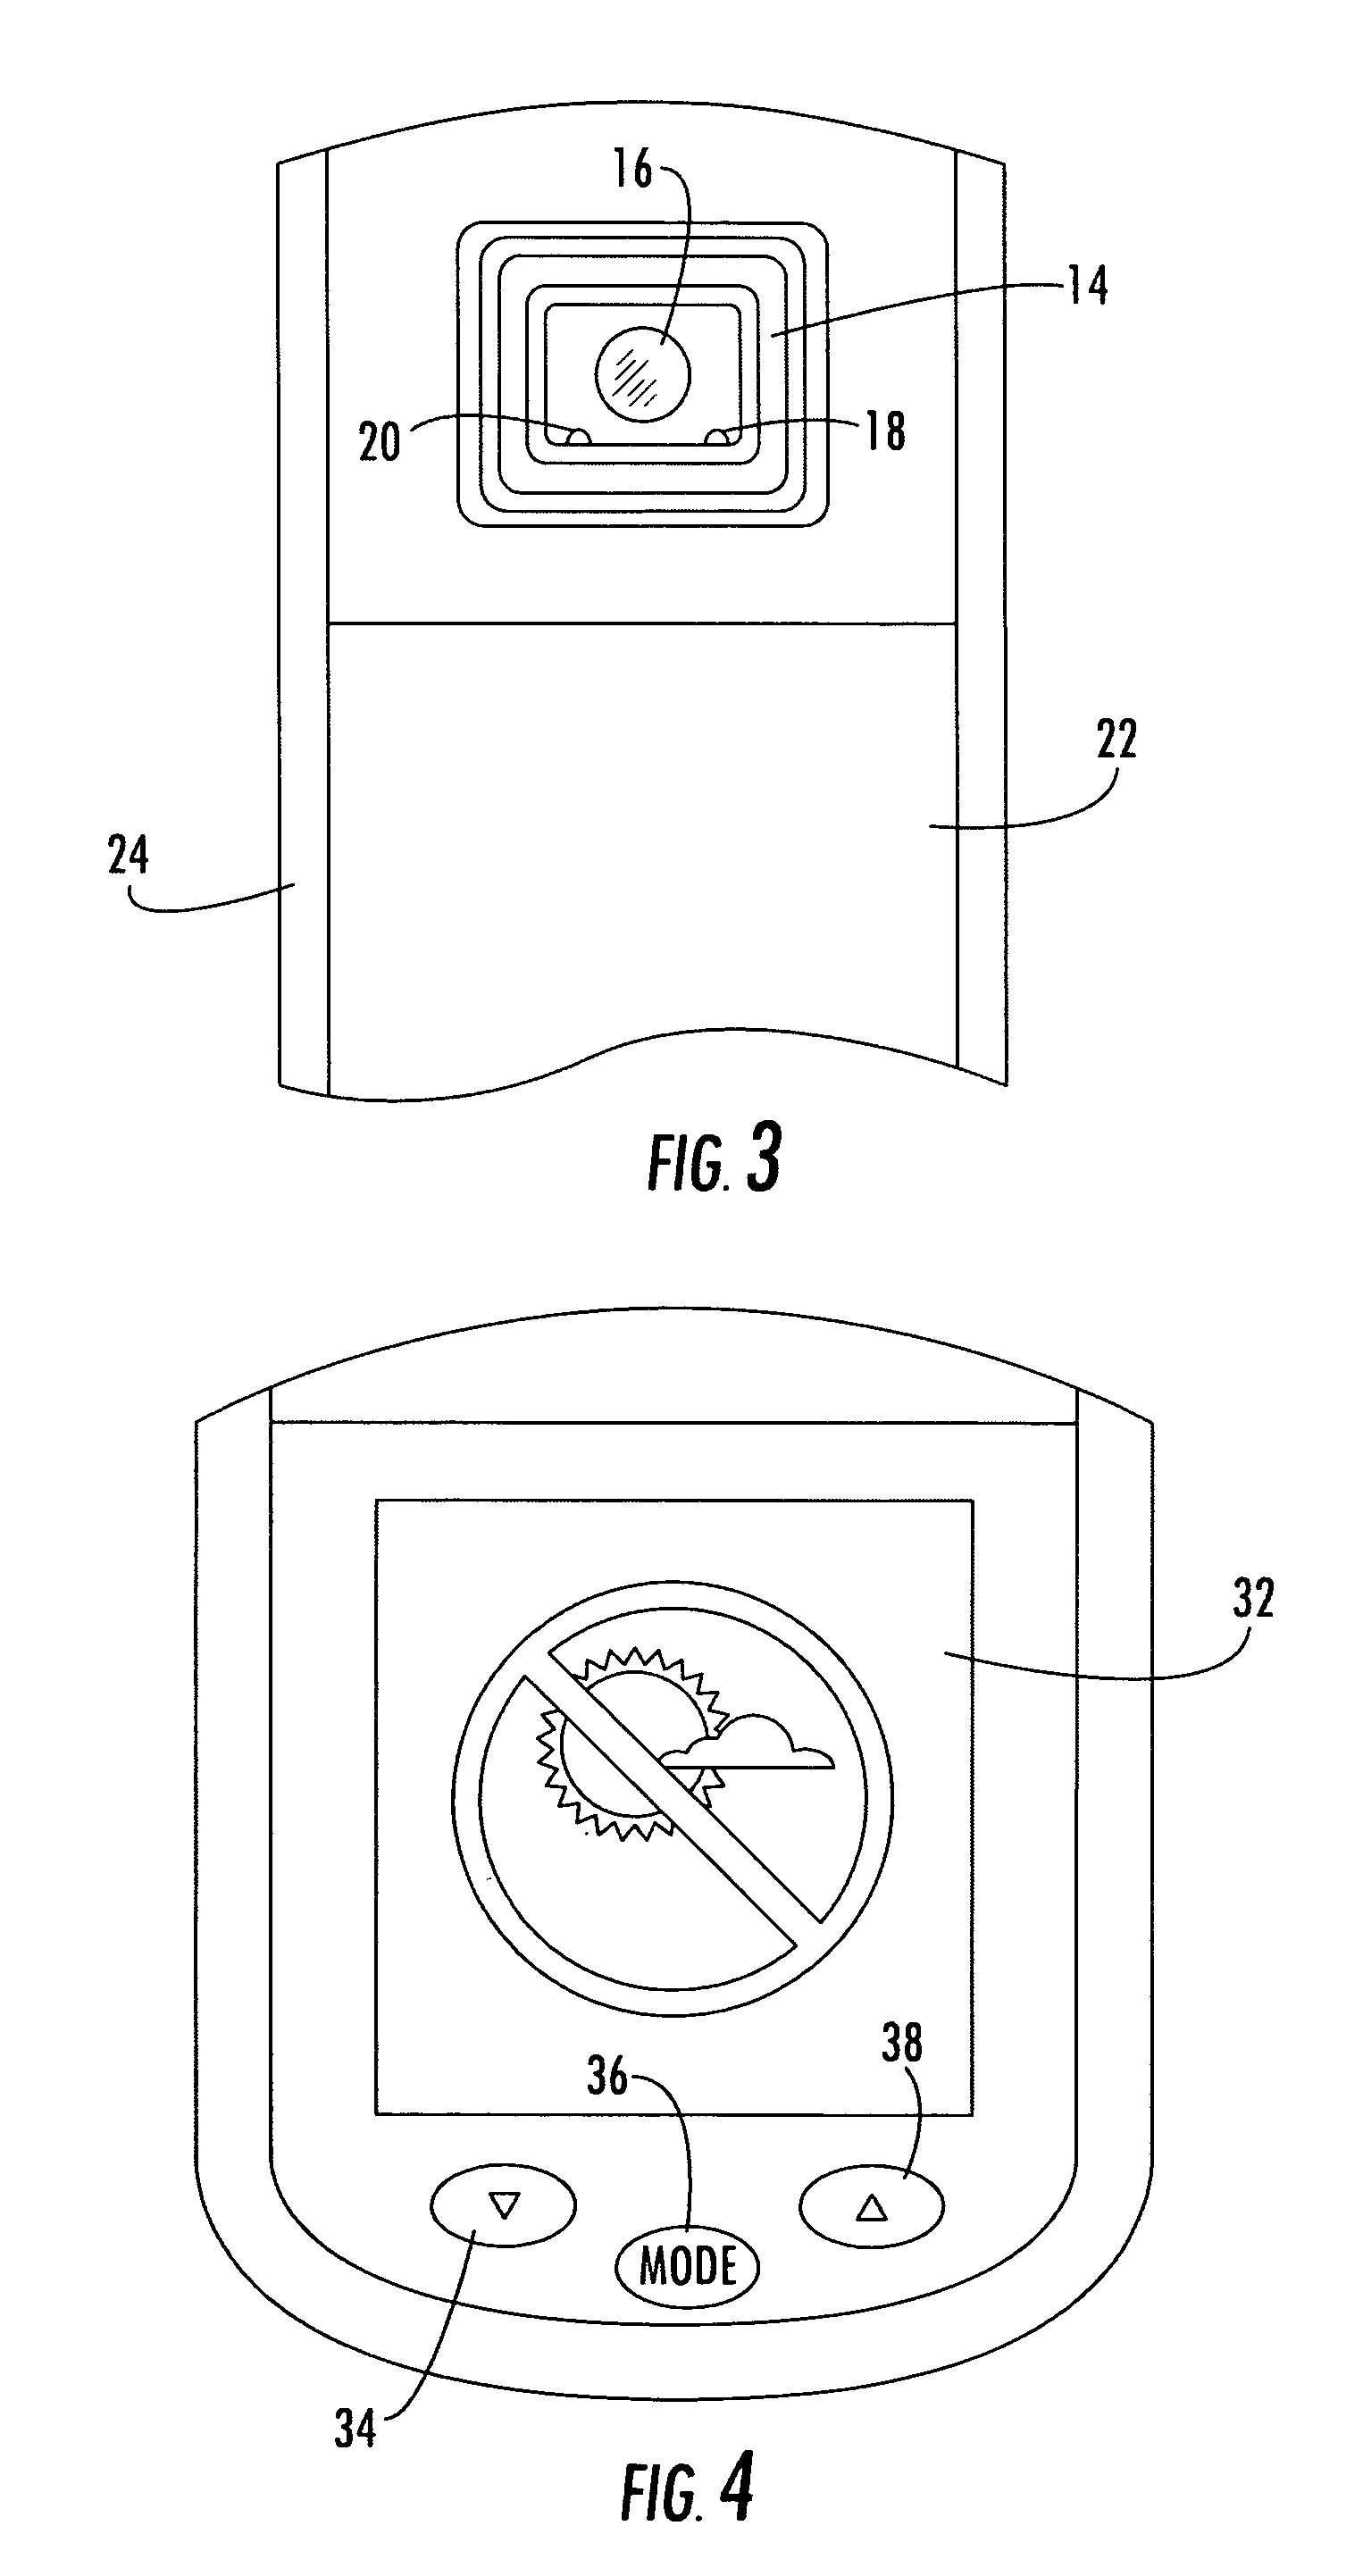 Thermal imager having sunlight exposure protection mechanism